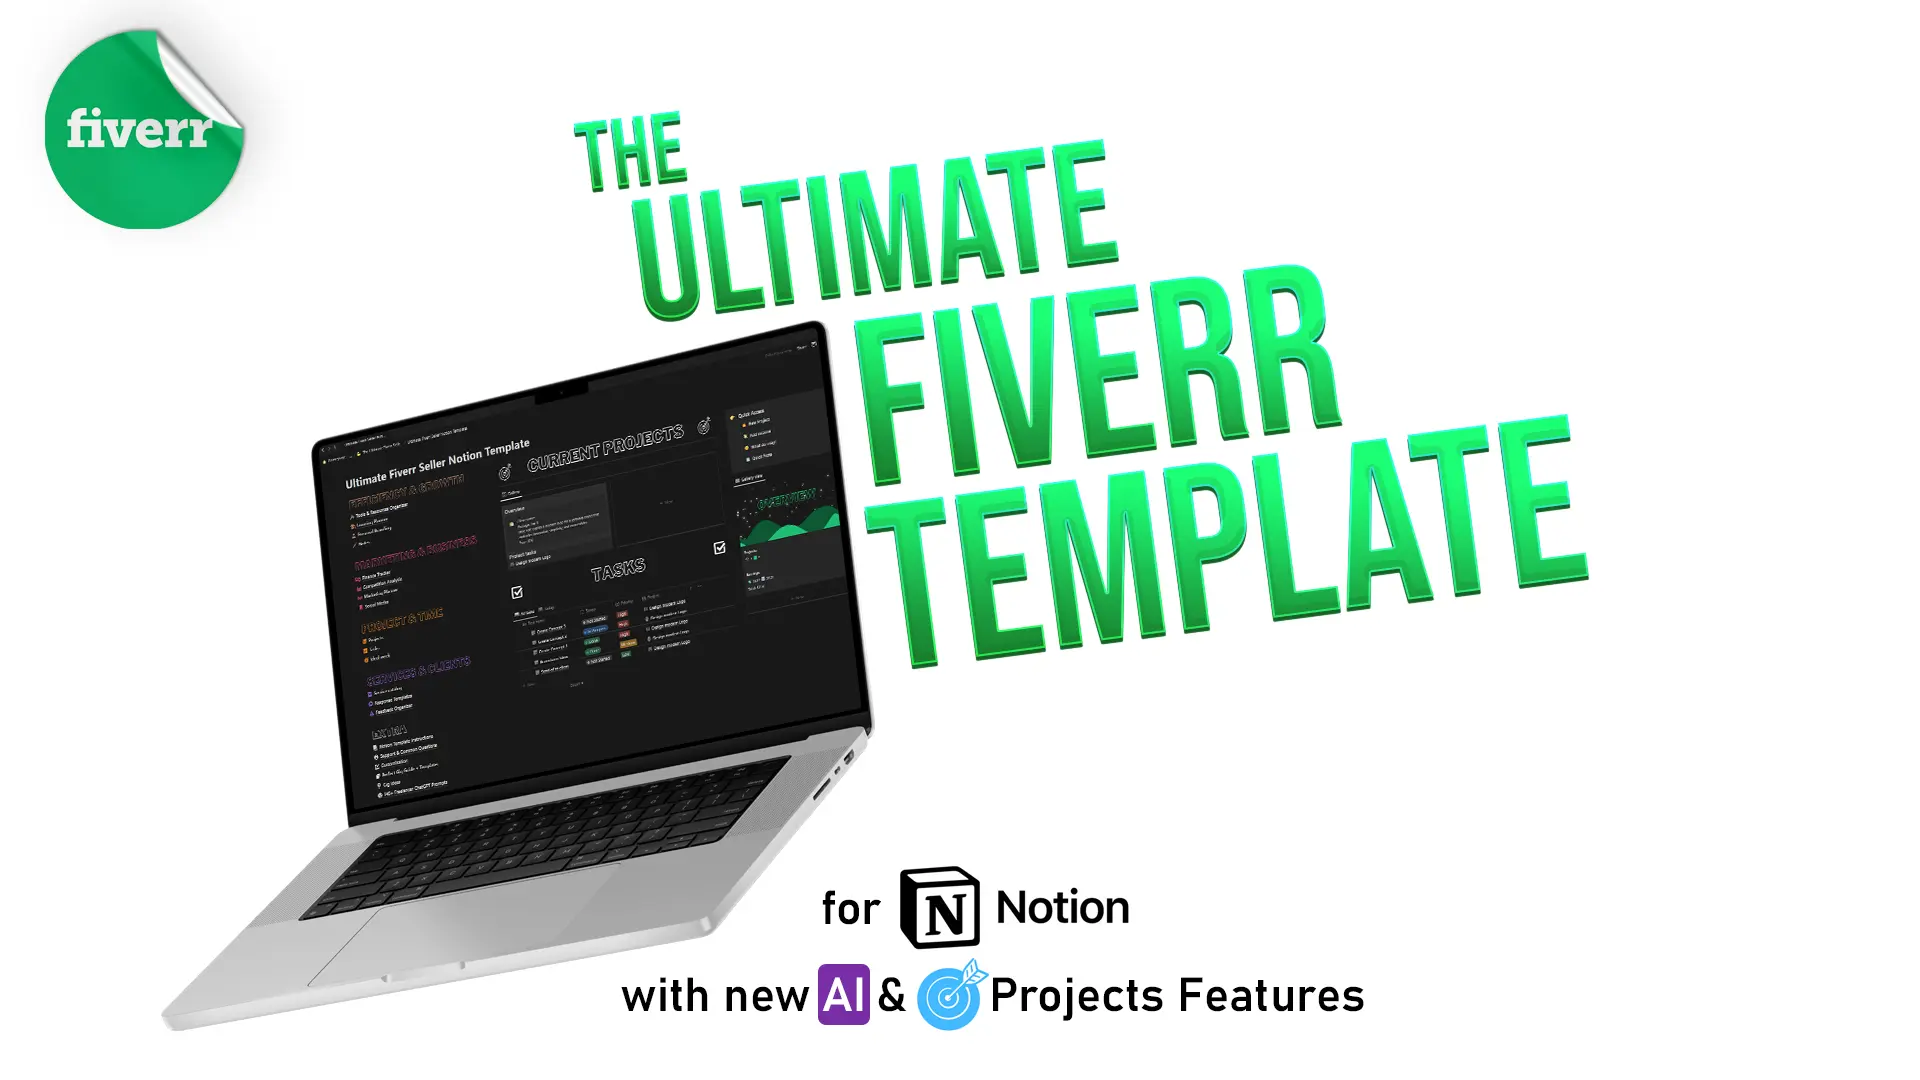 The Ultimate Fiverr Seller Notion Template image